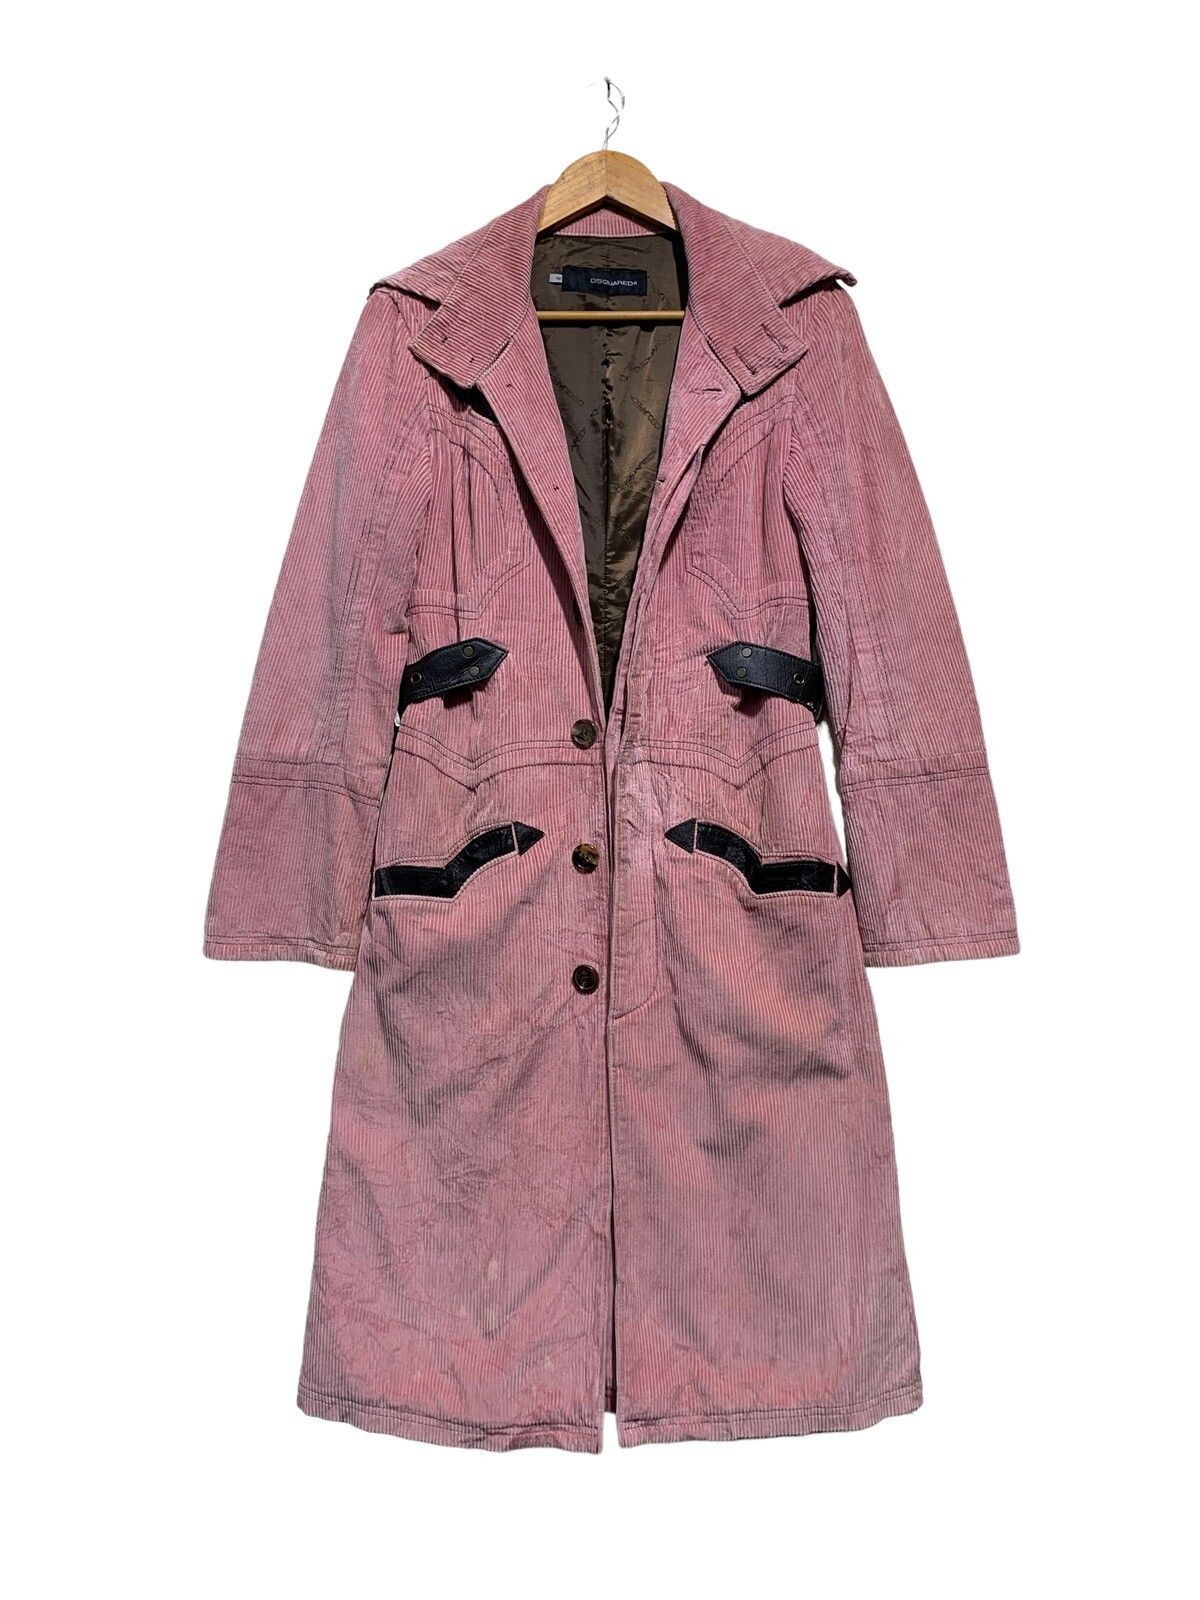 🔥DSQUARED2 CORDUROY TRENCH COATS - 1